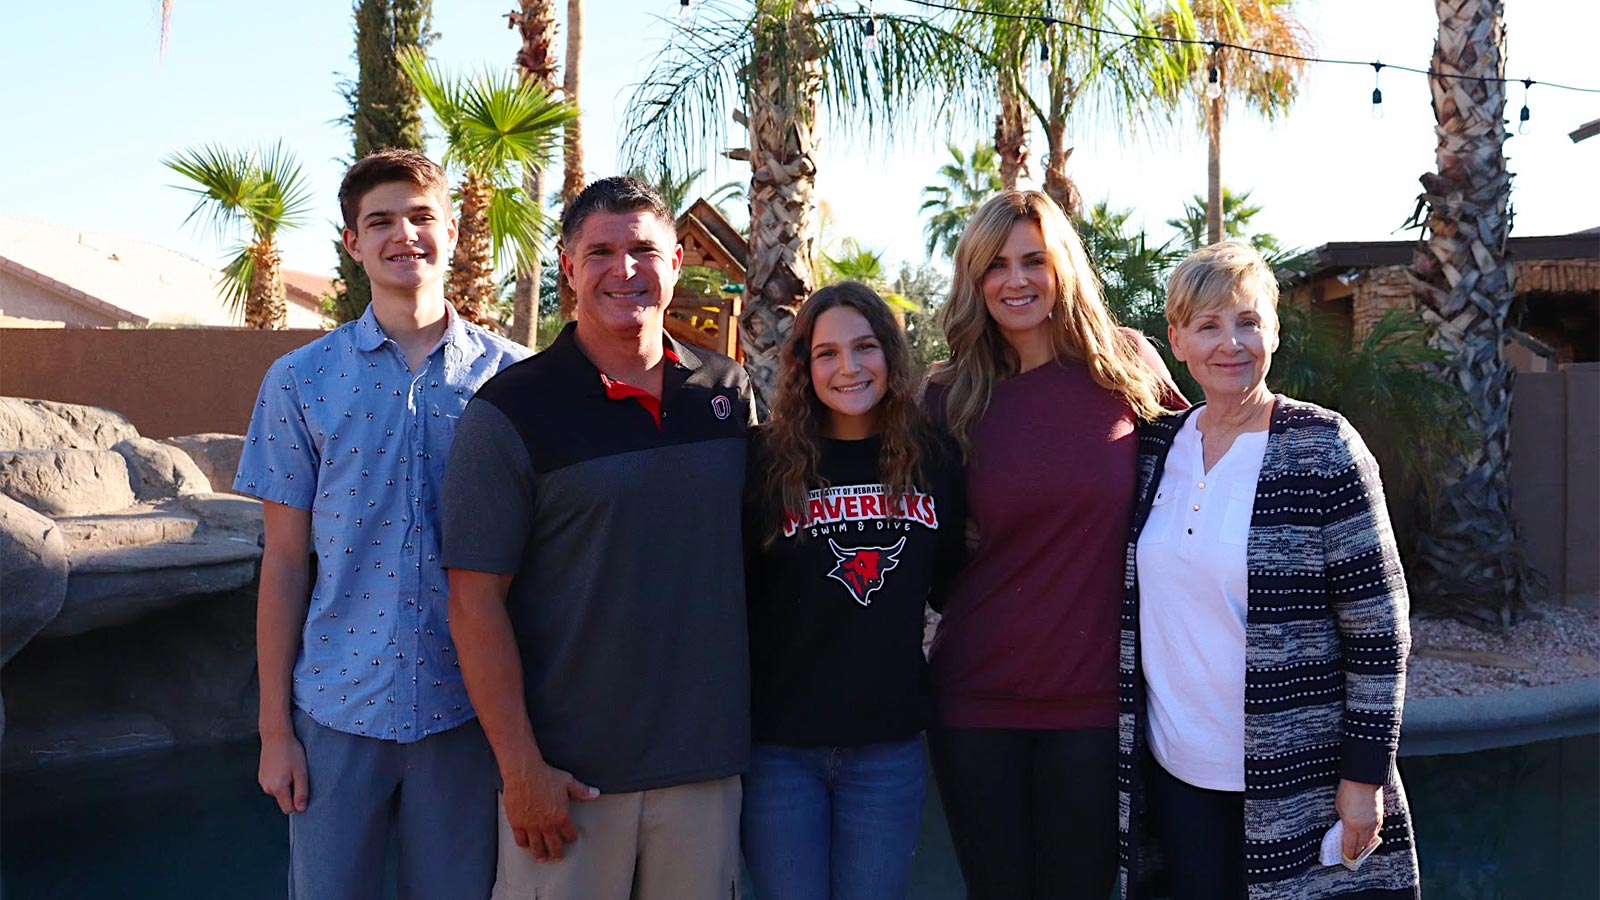 A picture of the Khalil family celebrating Sadie's commitment to become a Division 1 Student Athlete (swimming).